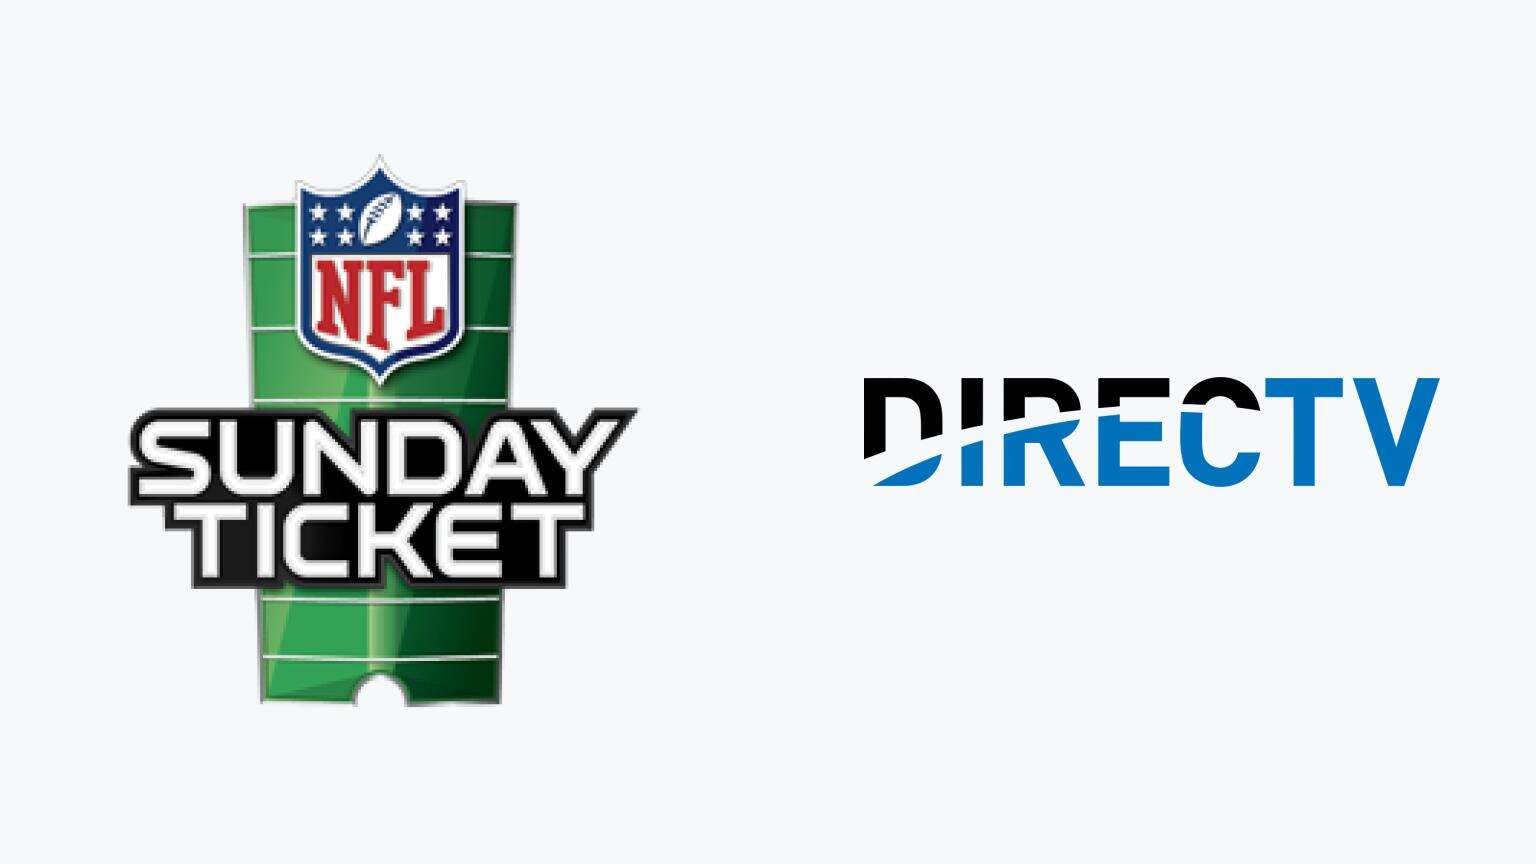 NFL Sunday Ticket Subscription - wide 8